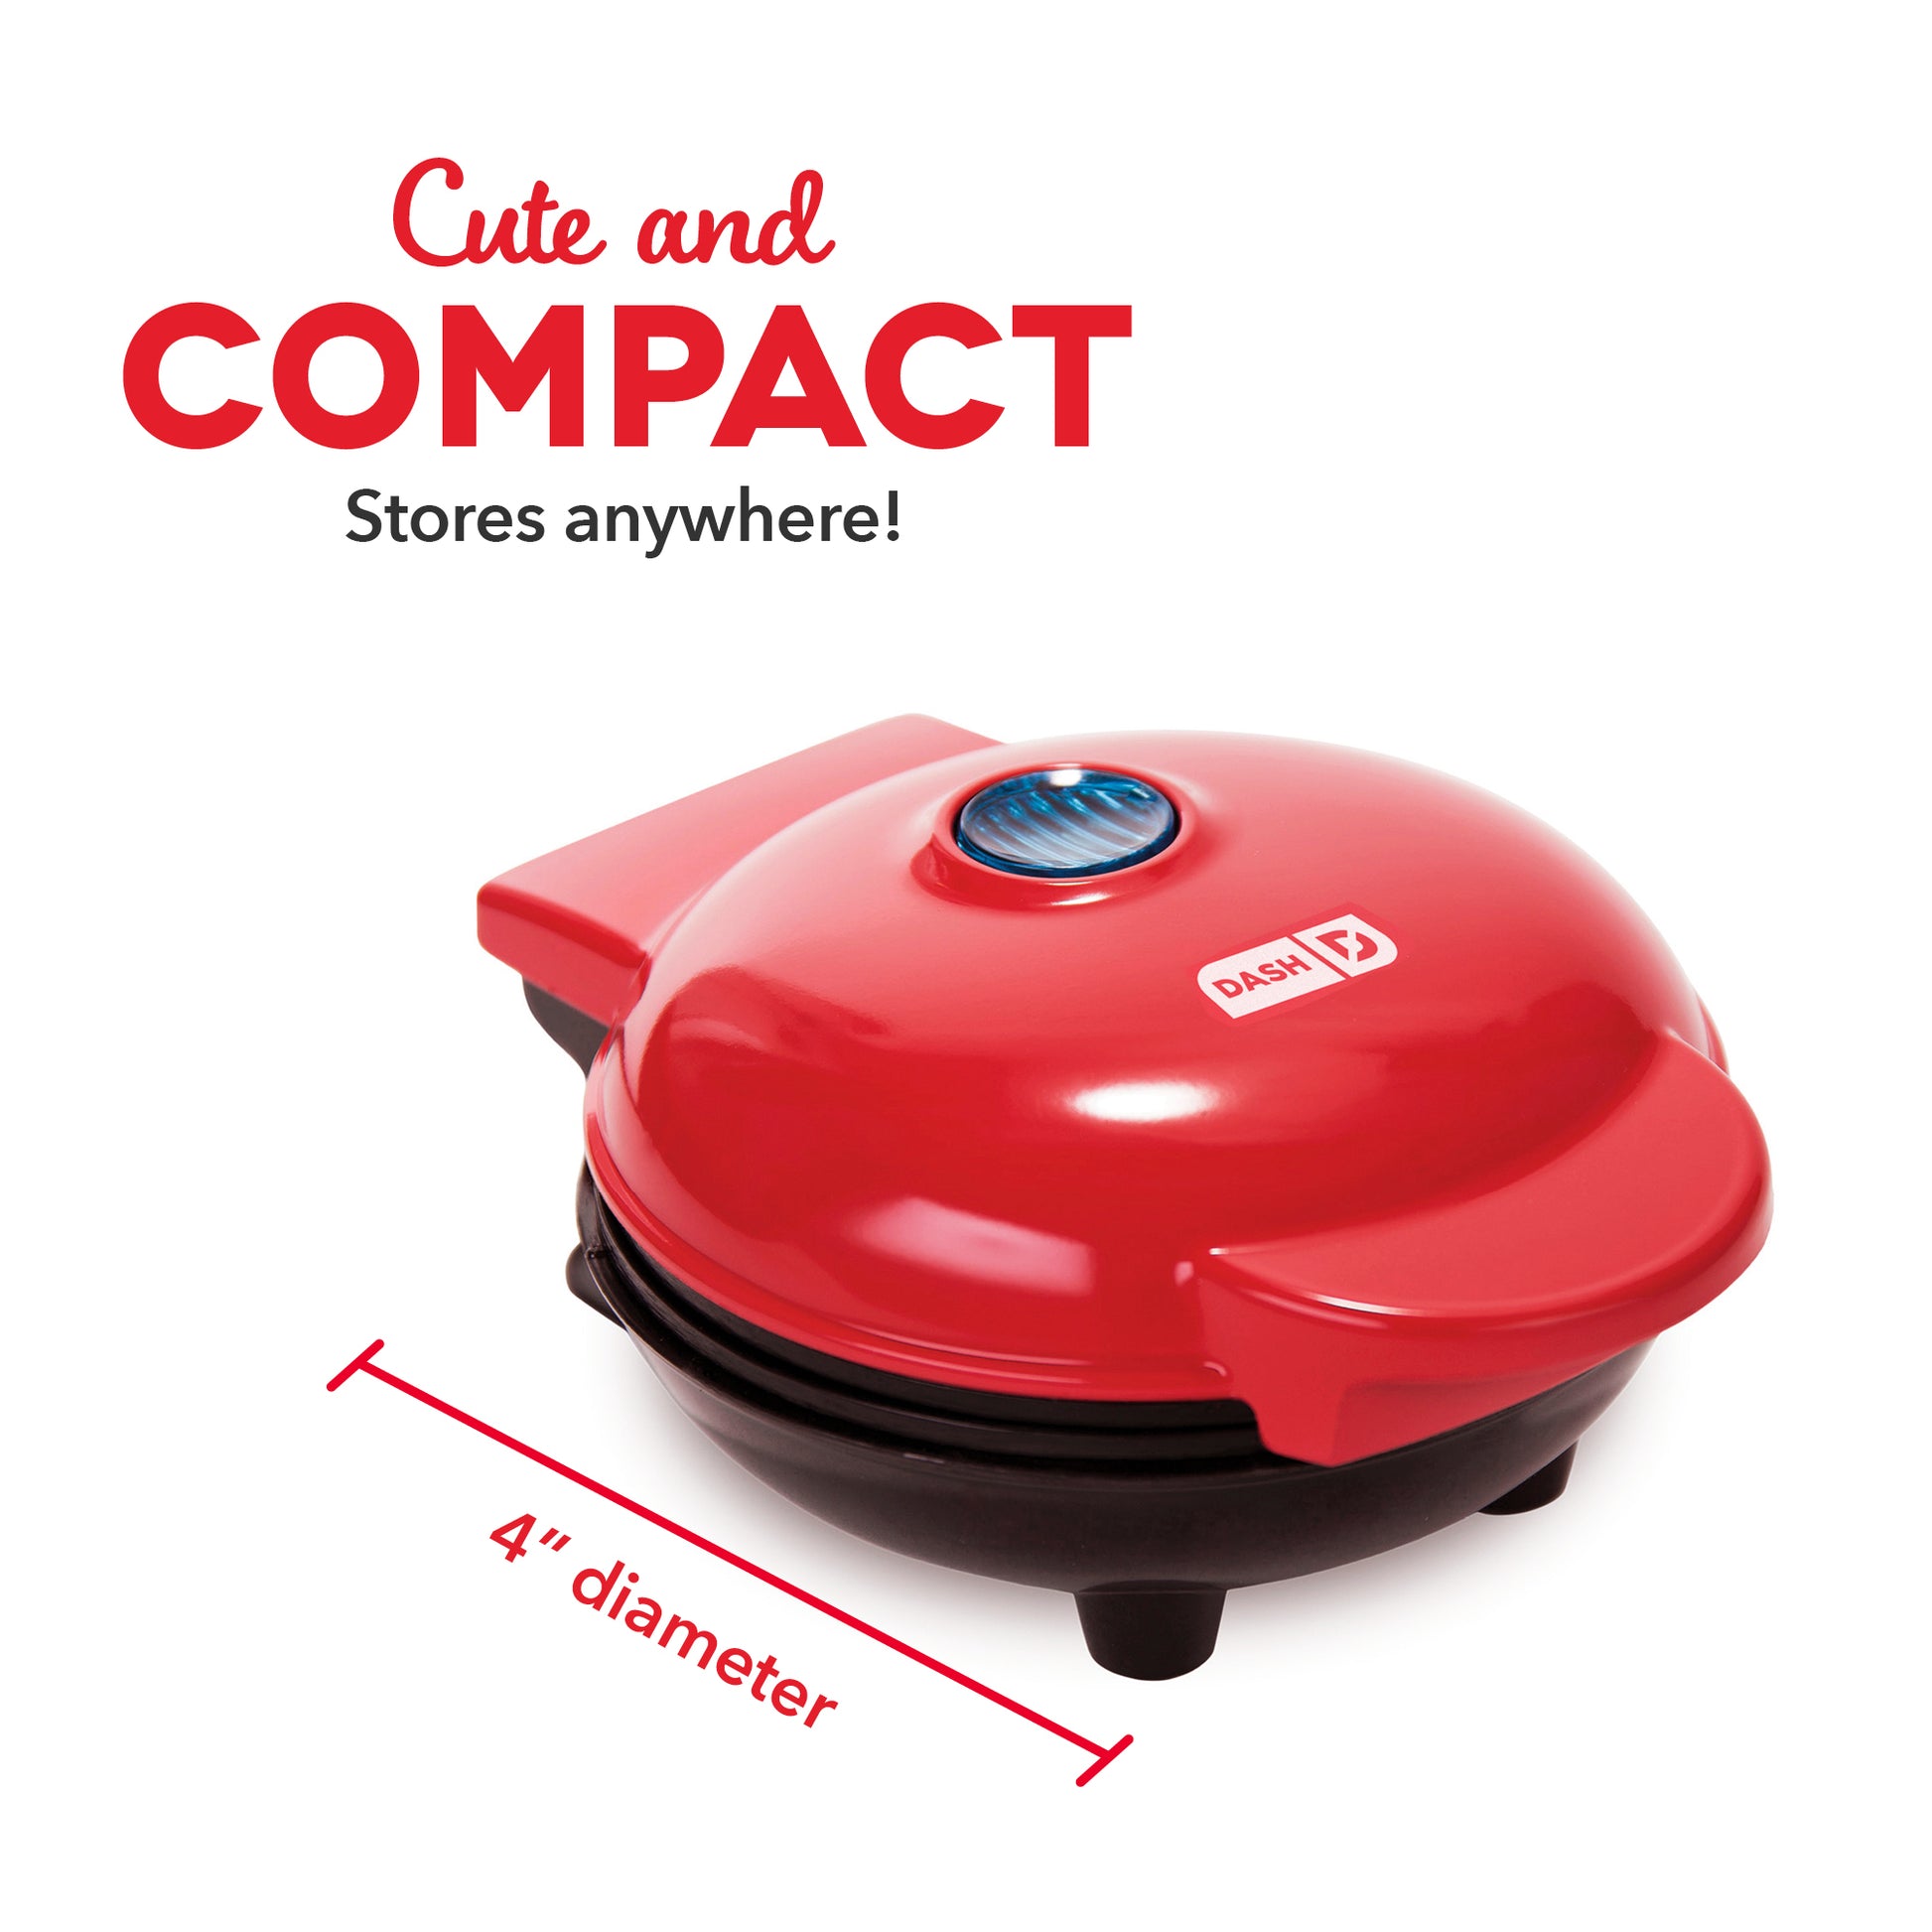 Dash's Heart-Shaped Mini Waffle Makers Are on Sale on